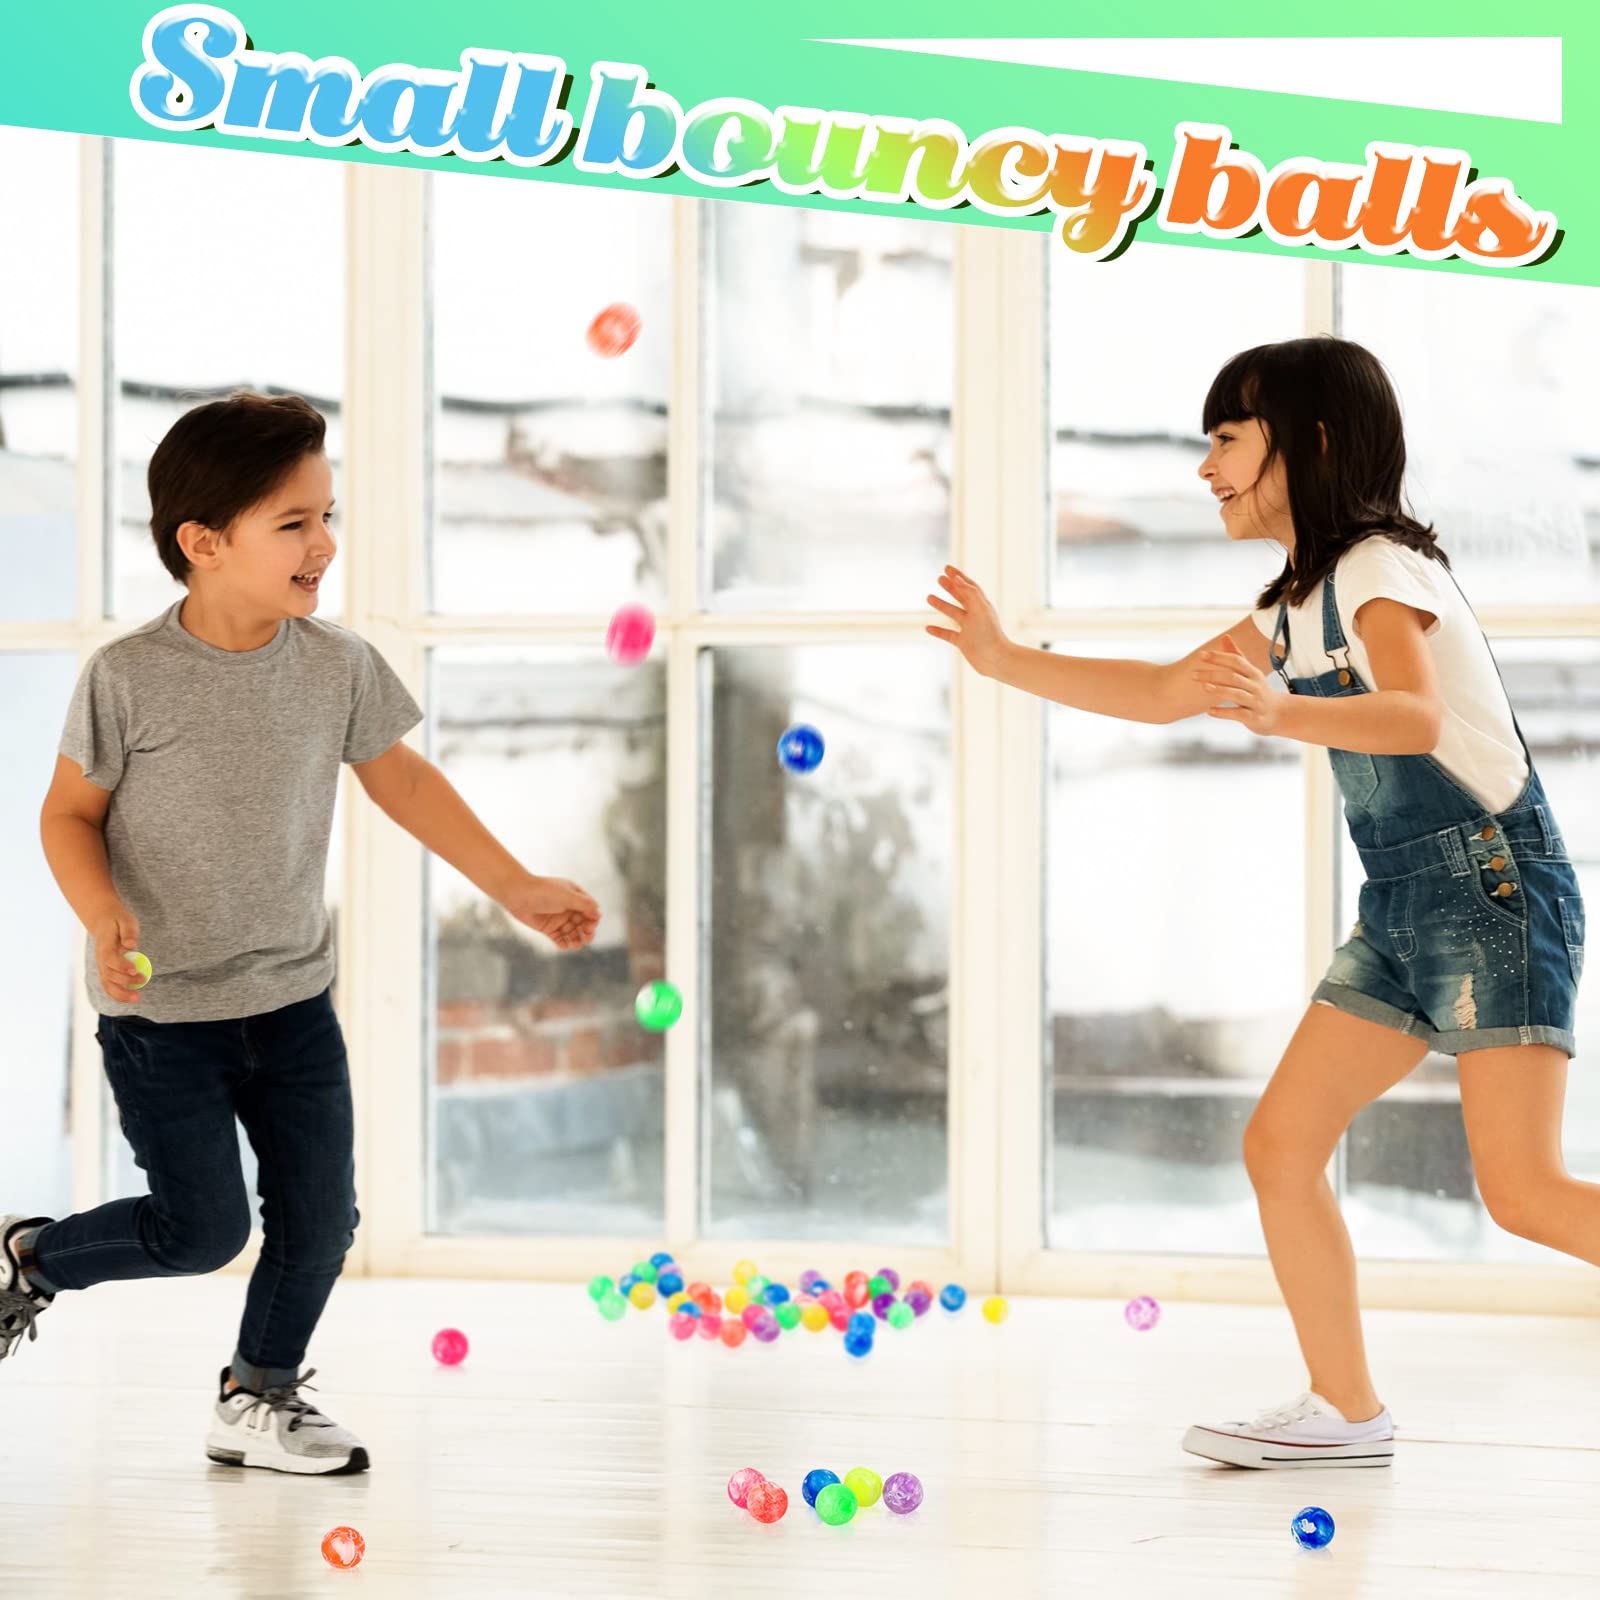 Small Bouncy Balls Bulk 0.78 Inch/ 20 mm Rubber High Bouncing Balls Neon Cloud Bounce Balls Mini Bouncy Balls for Birthday Party Favors Gift Game Prizes Vending Machines Fillers Outdoor